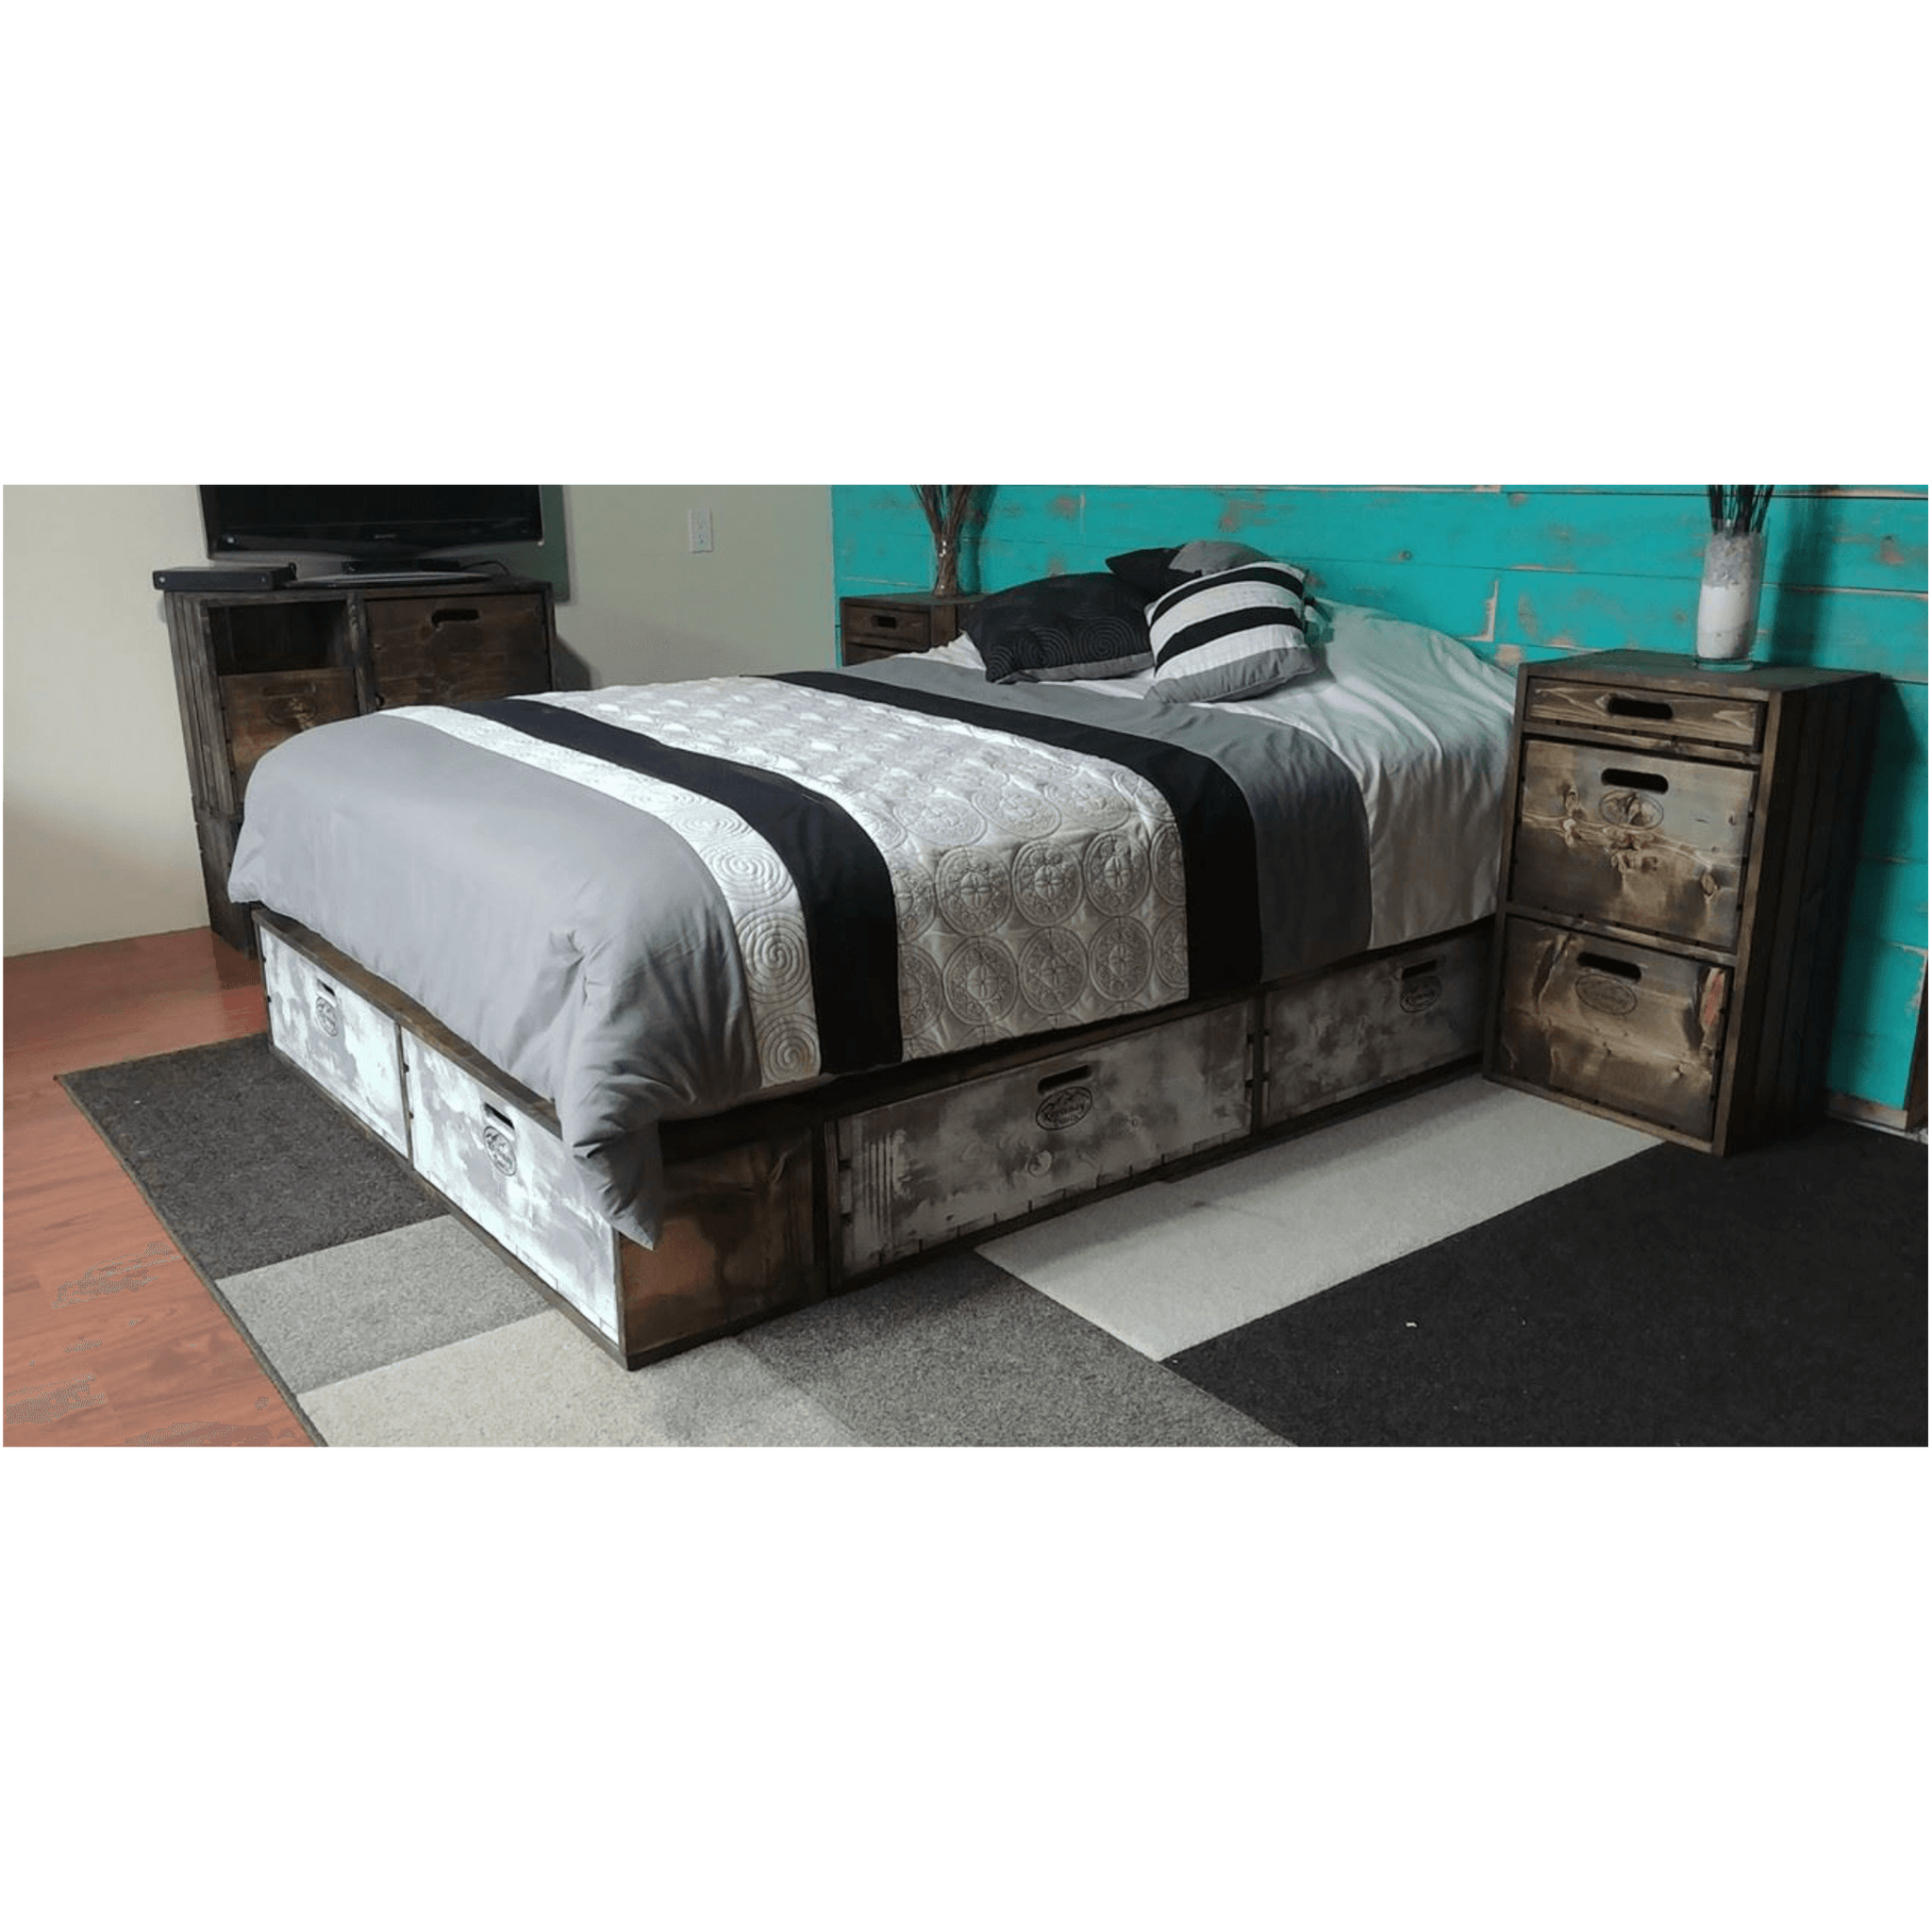 Rustic Storage Beds - NOW AVAILABLE FOR ORDER - 3 TO 4 WEEK COMPLETION